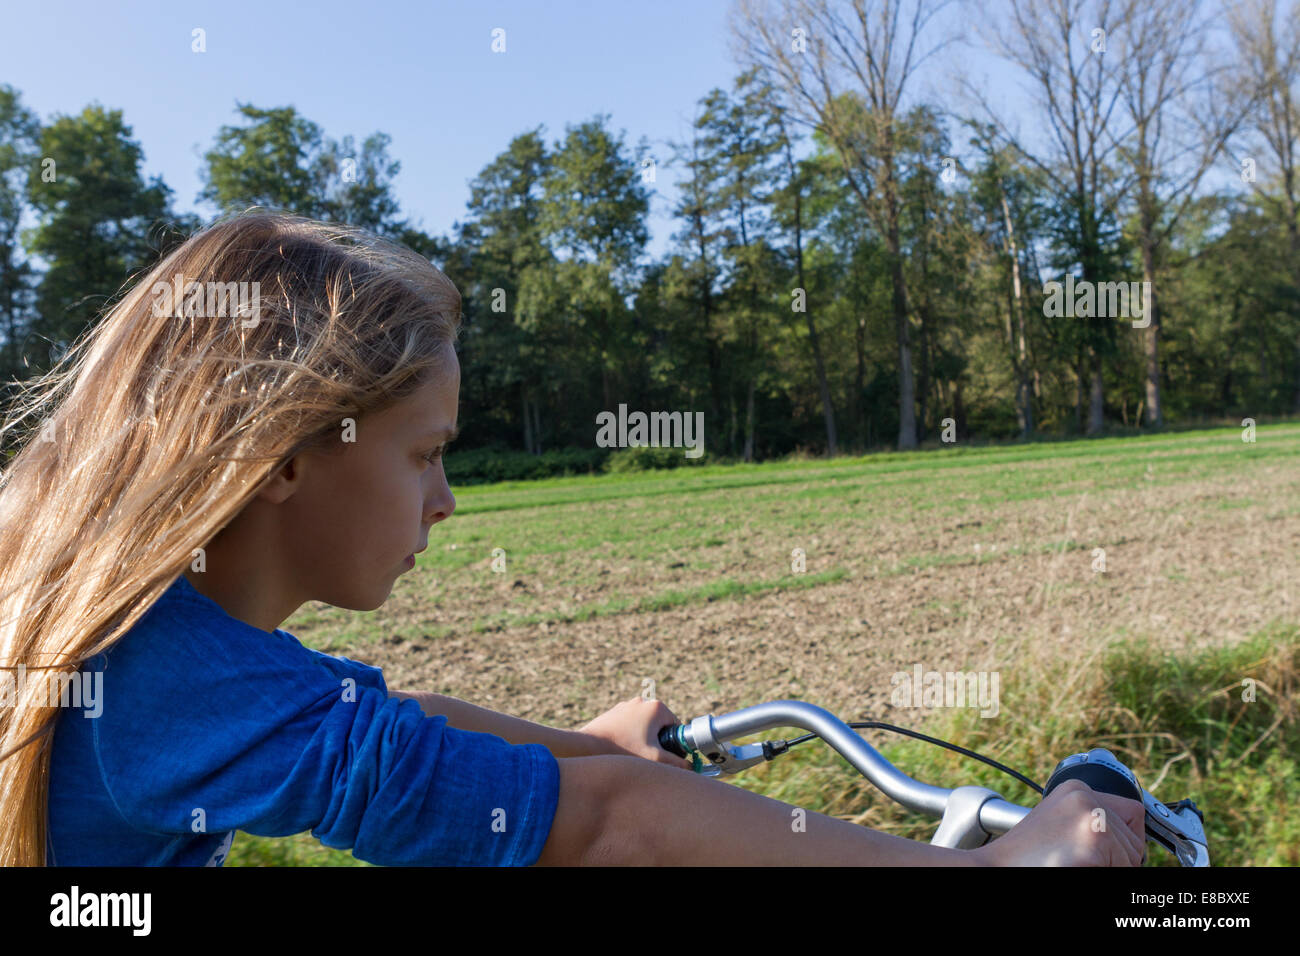 A young girl, looking serious and determined, rides a bicycle through the open countryside. Model Released. Stock Photo